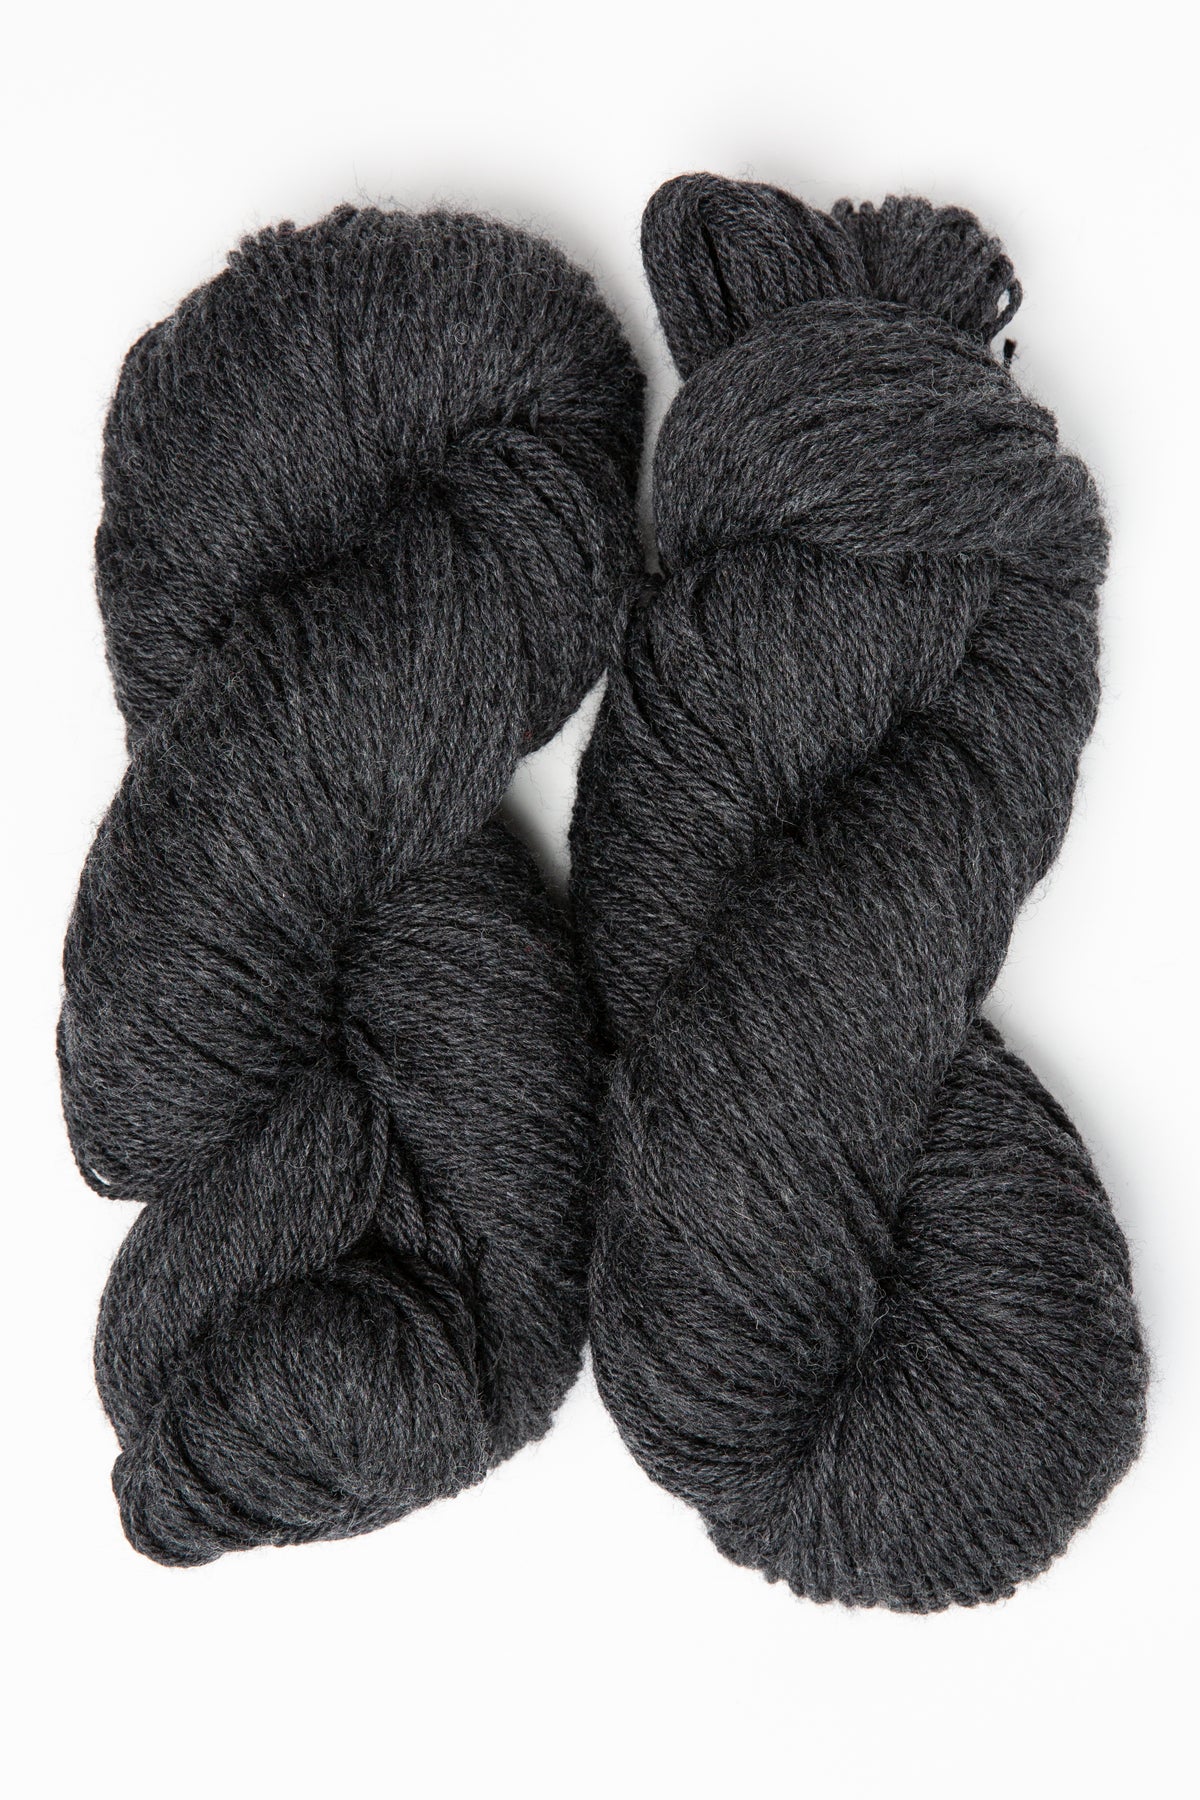 Vintage BEEHIVE Scotch Fingering Wool 3 Ply Charcoal Black 6293